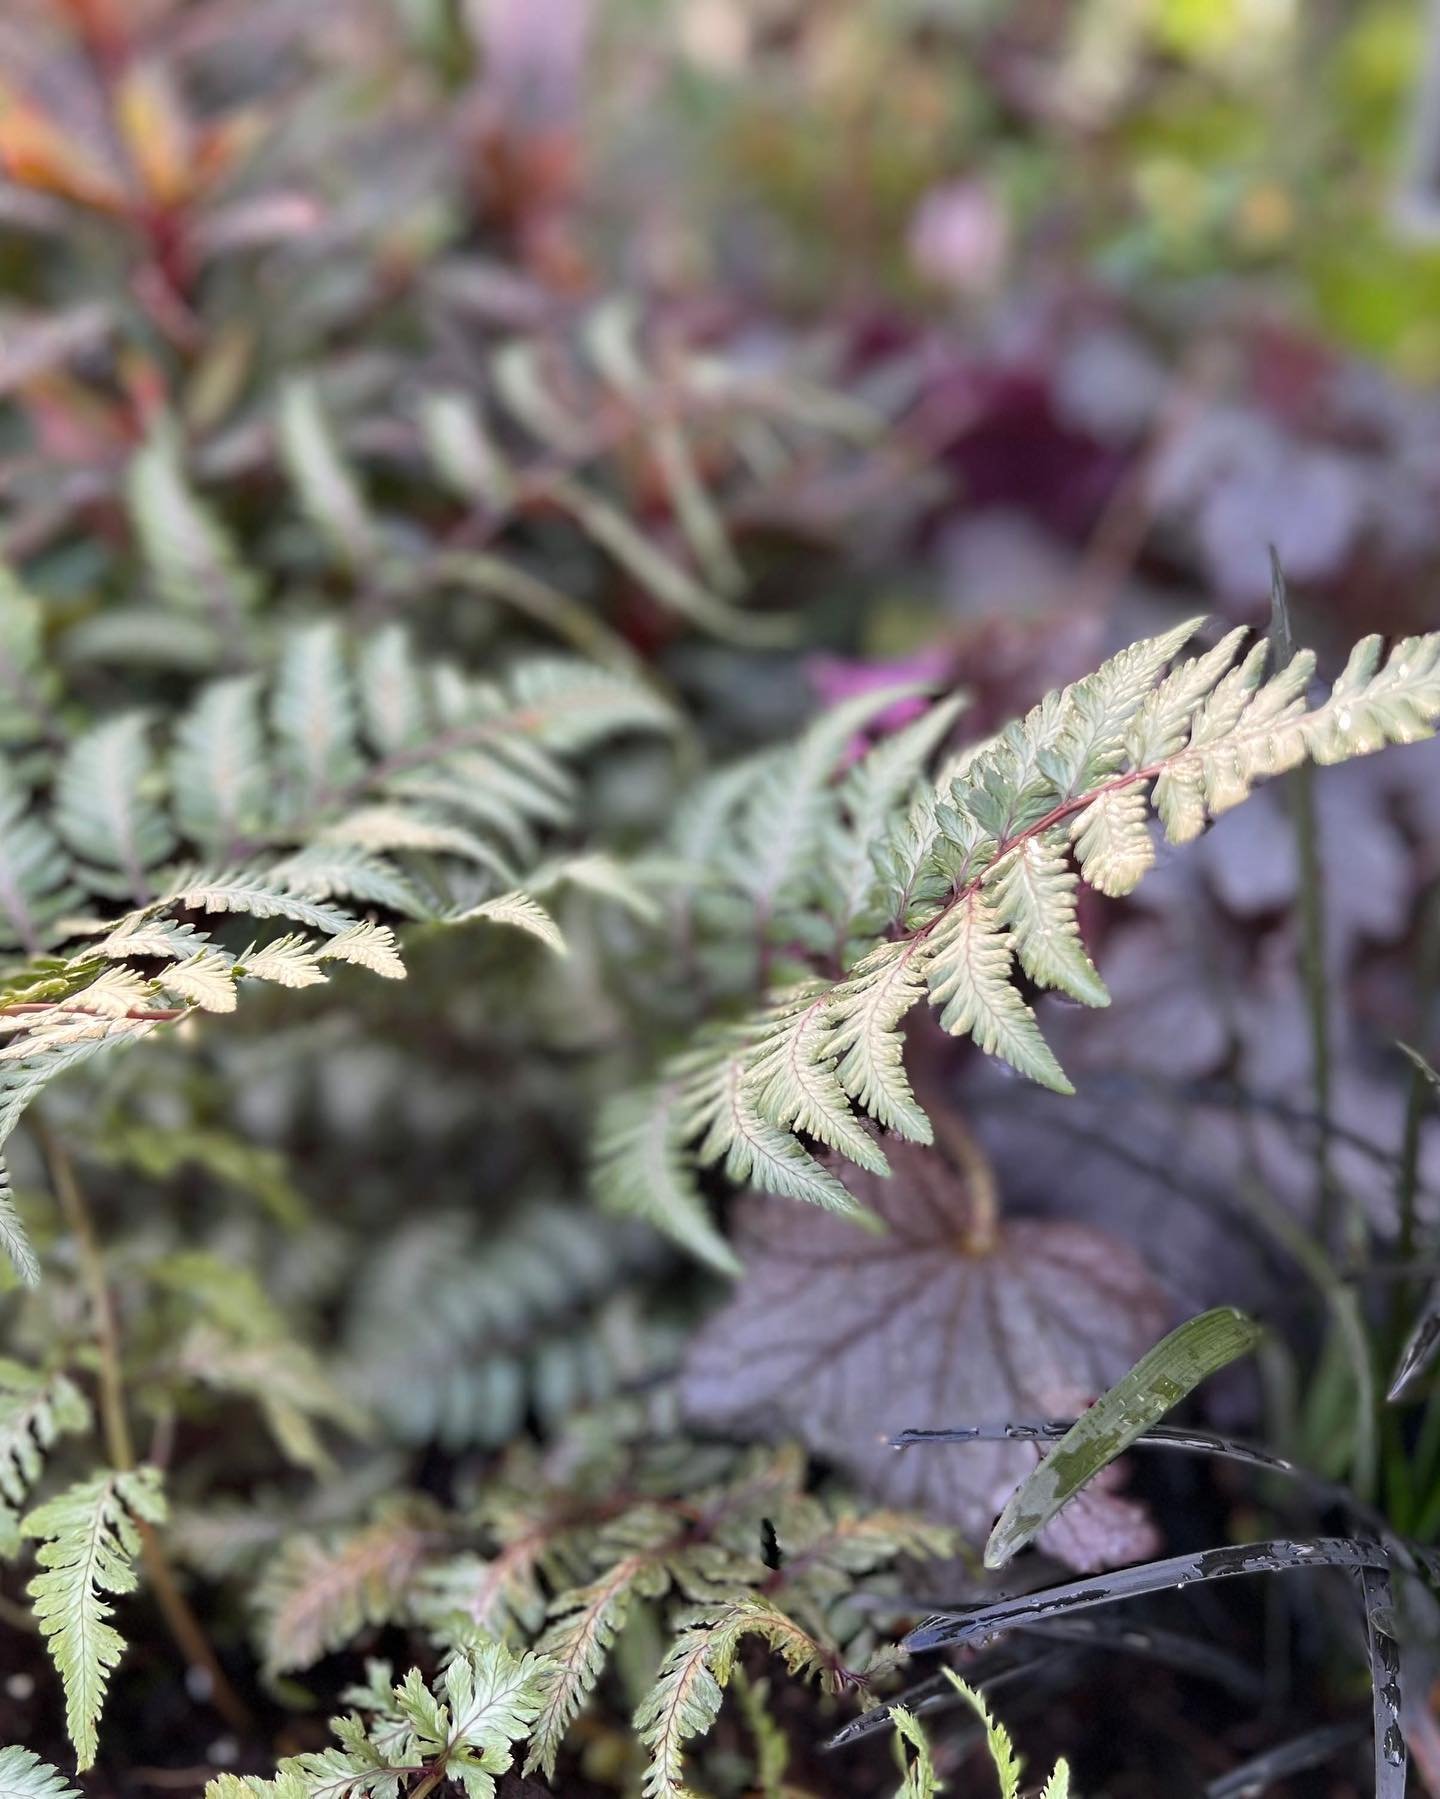 The EcoLab team wrapped up a great week at this year's @phsgardening Flower Show. Check out some of the beautiful plant species that made up our &quot;Garden of Curious Senses&quot;.. and the blue ribbons that we won!

Image 1: Athyrium niponicum var